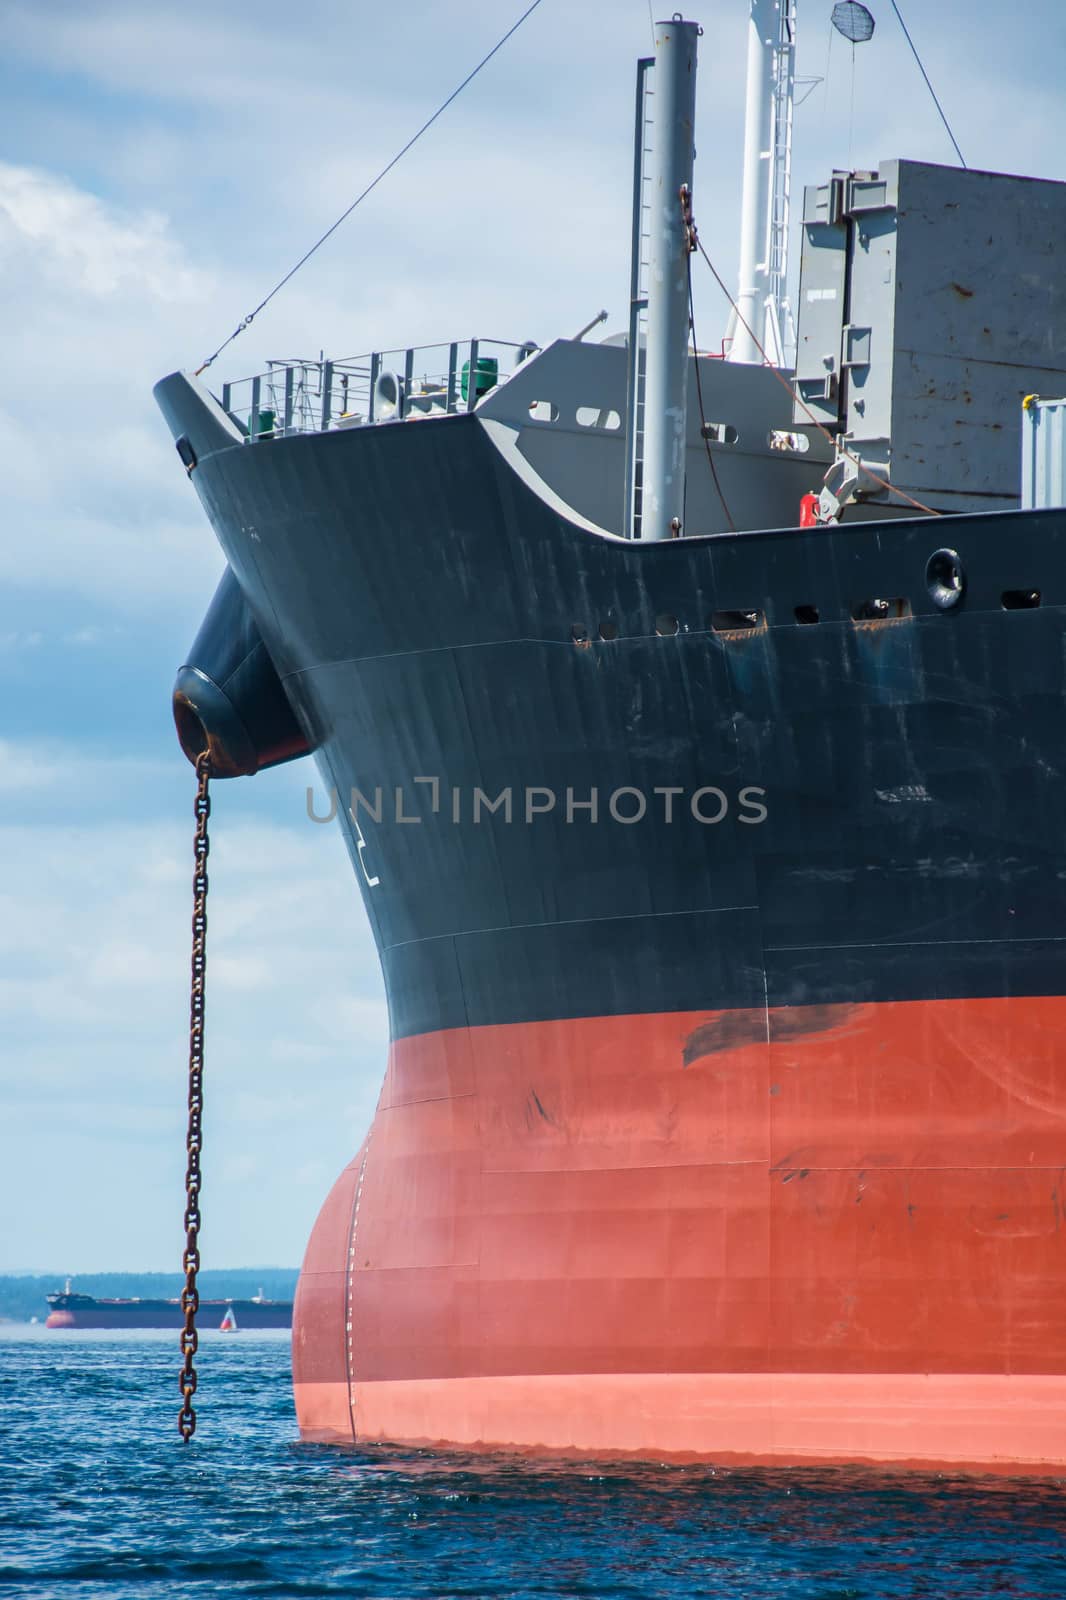 View of bow of cargo ship with anchor chain deployed